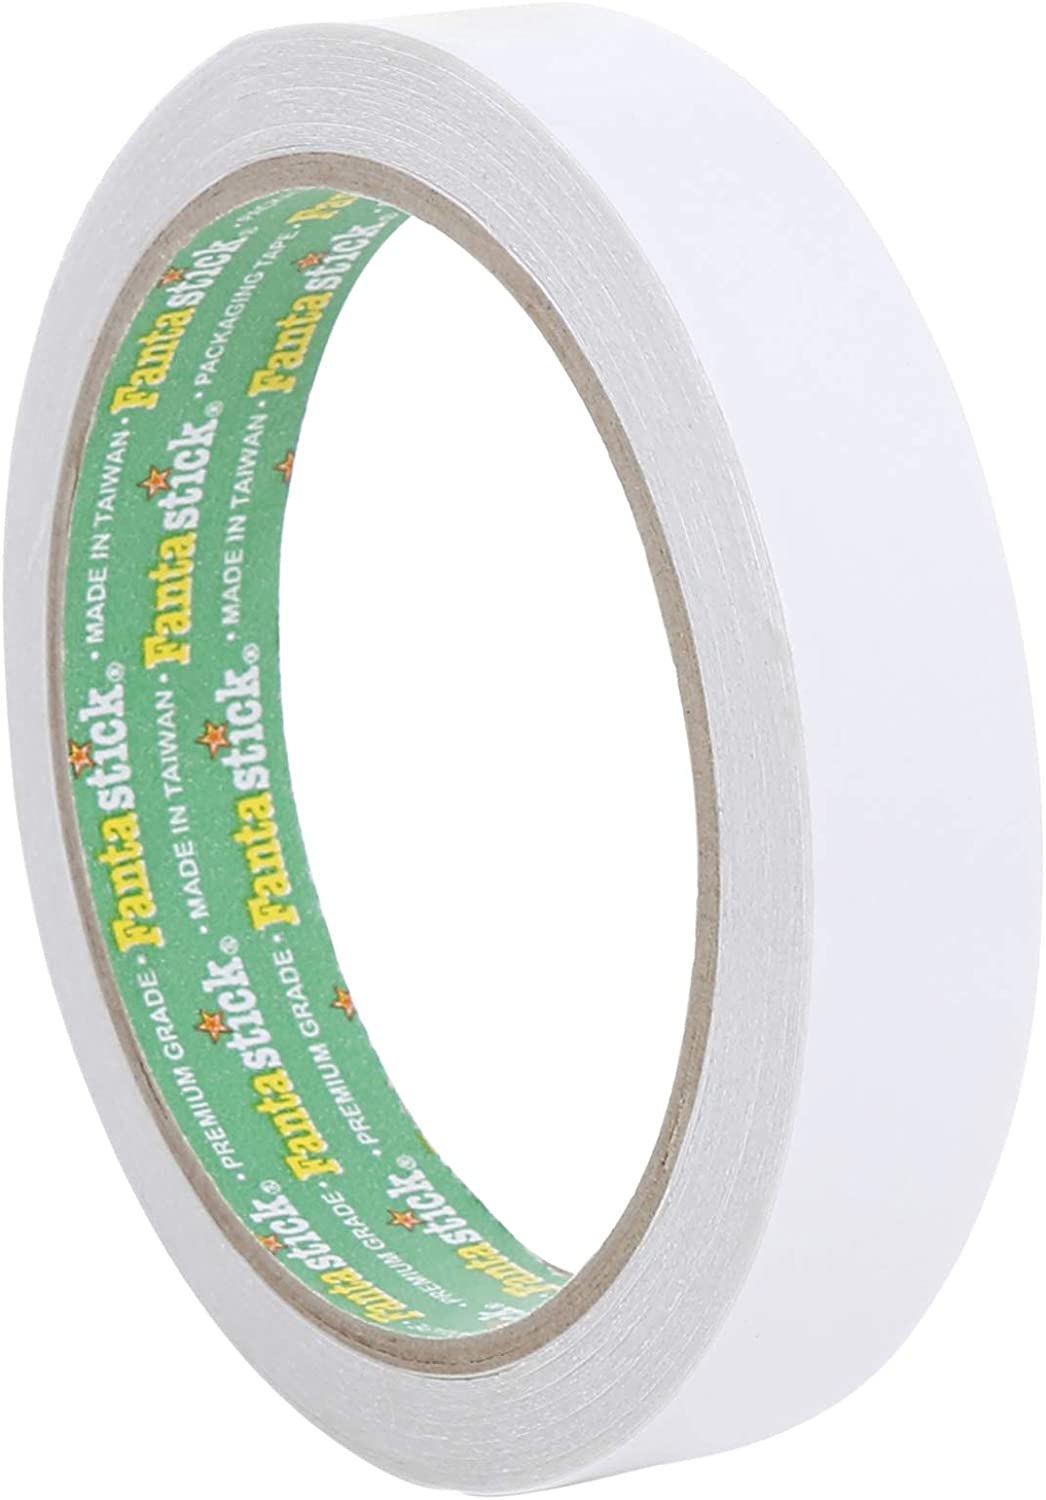 Generic Fantastick Double Sided Tape, 18mm X 12 Yards